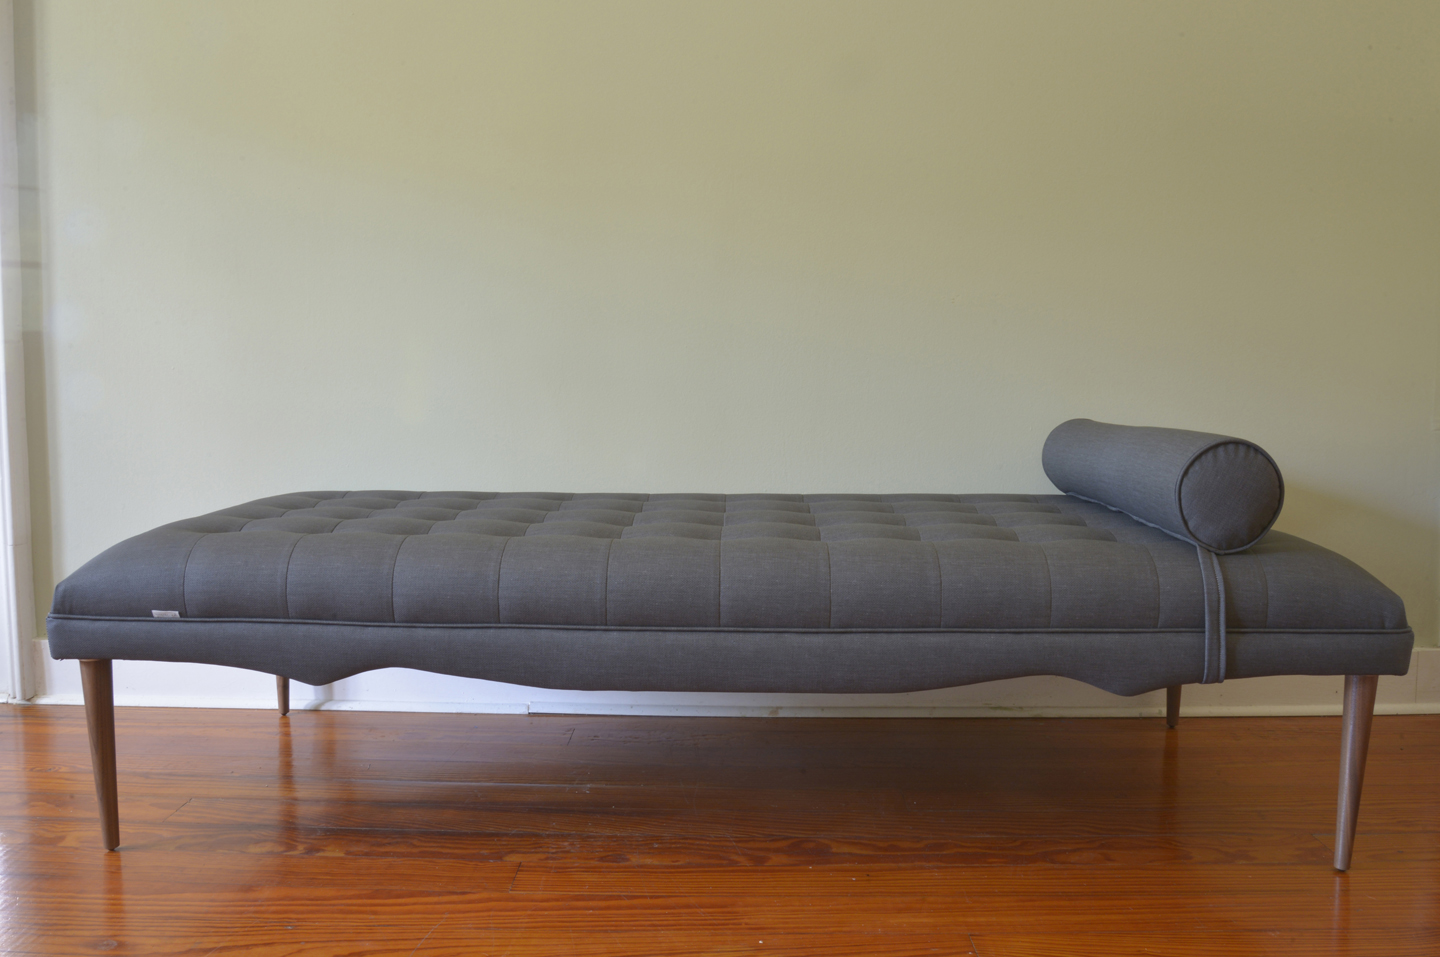 The Sublime daybed with dark Texian legs